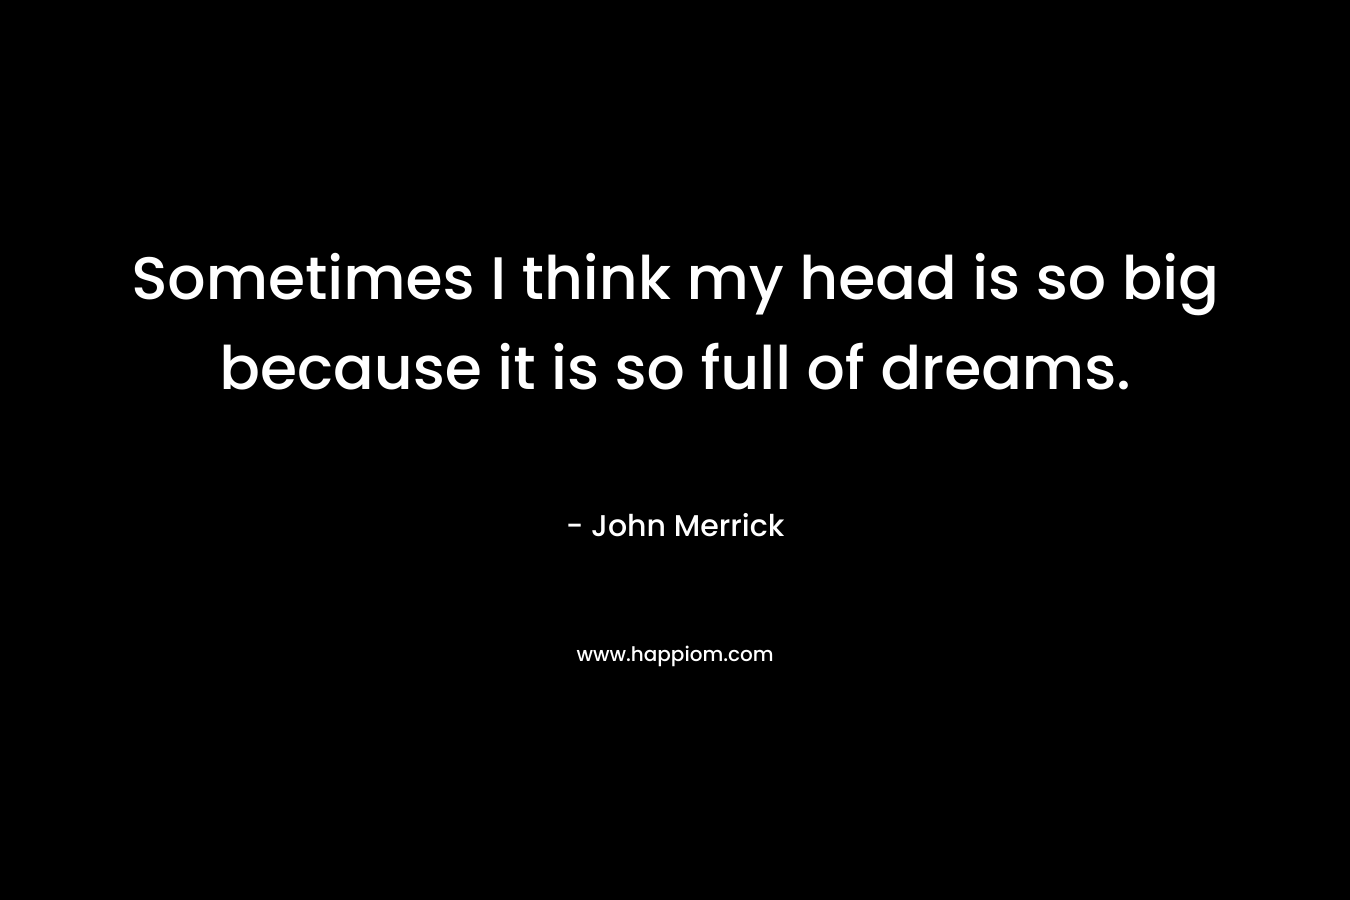 Sometimes I think my head is so big because it is so full of dreams.